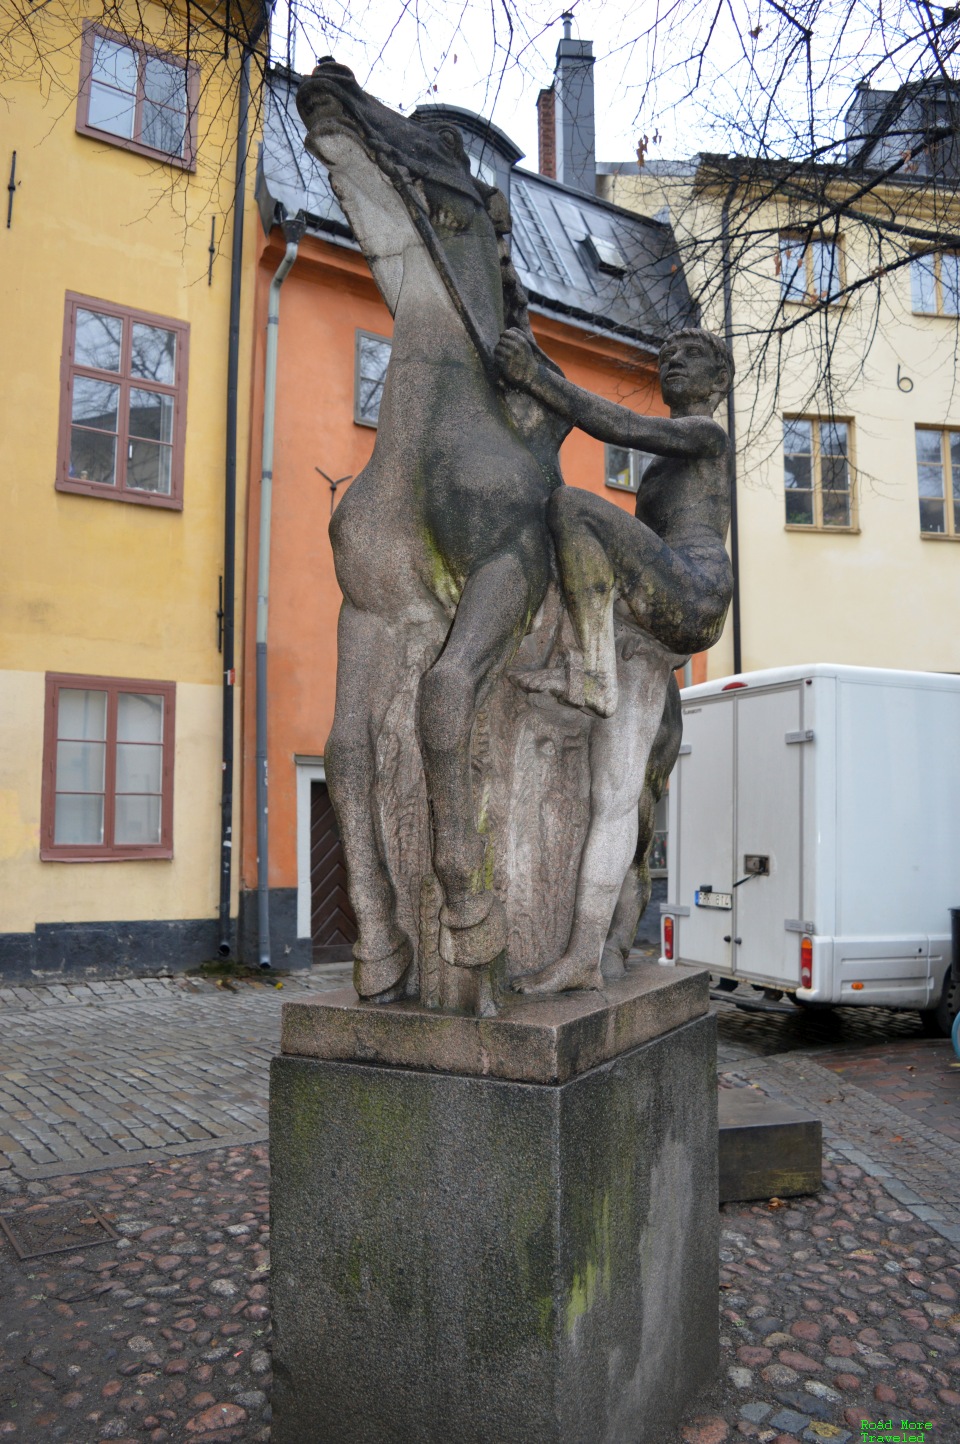 The Boy Climbs the Horse statue